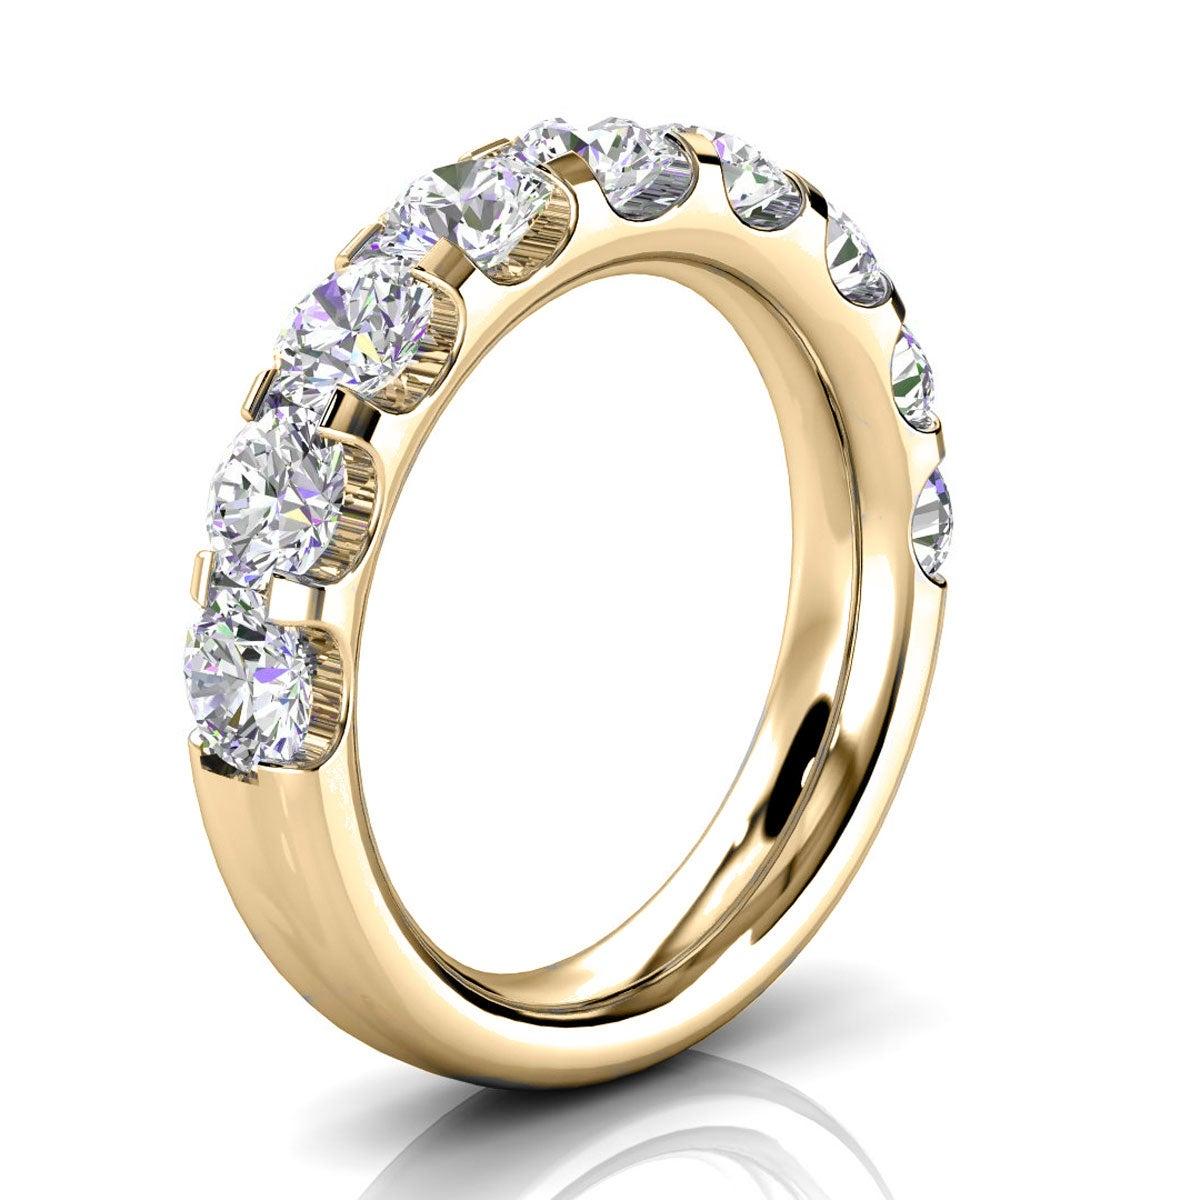 For Sale:  18K Yellow Gold Valerie Micro-Prong Diamond Ring '2 Ct. tw' 2